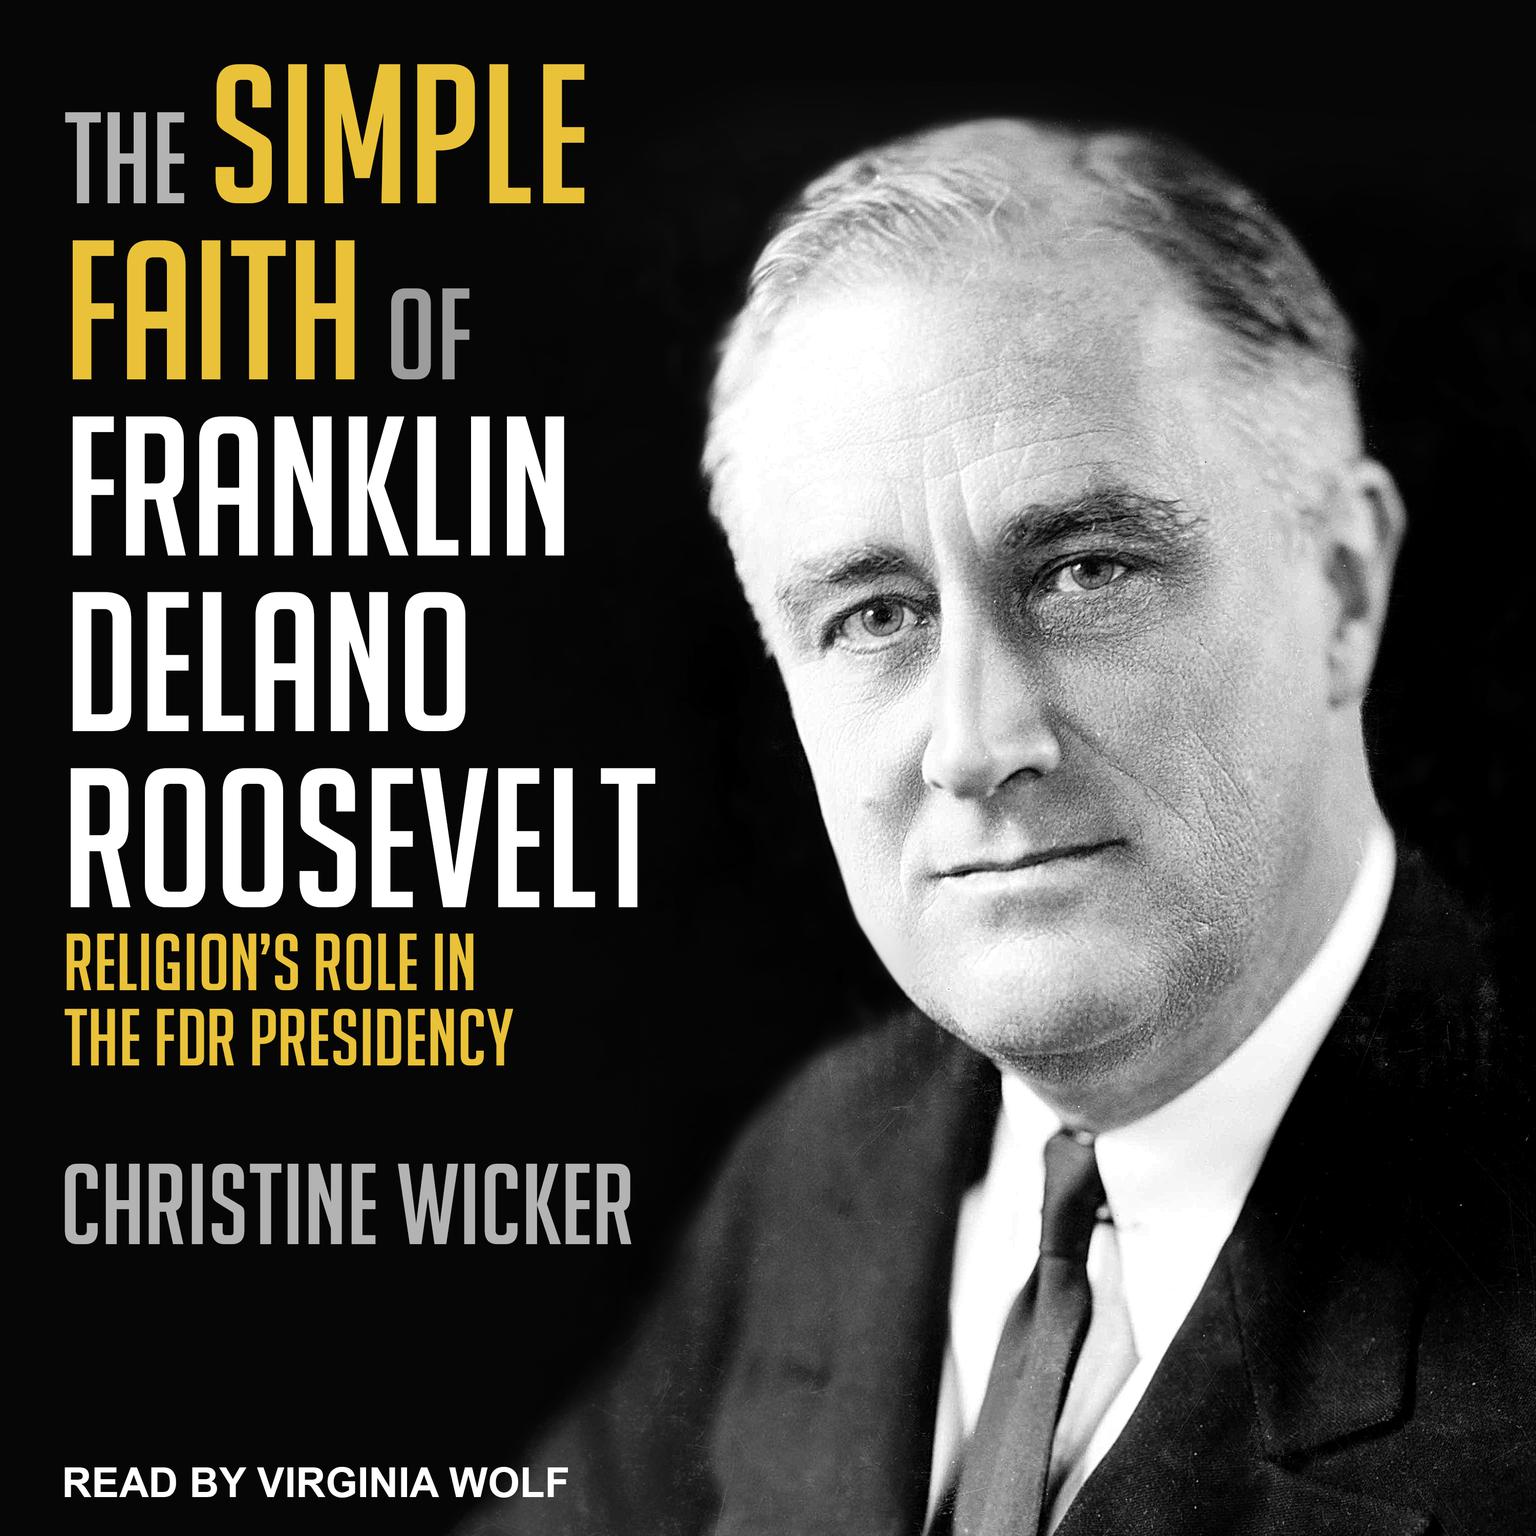 The Simple Faith of Franklin Delano Roosevelt: Religions Role in the FDR Presidency Audiobook, by Christine Wicker